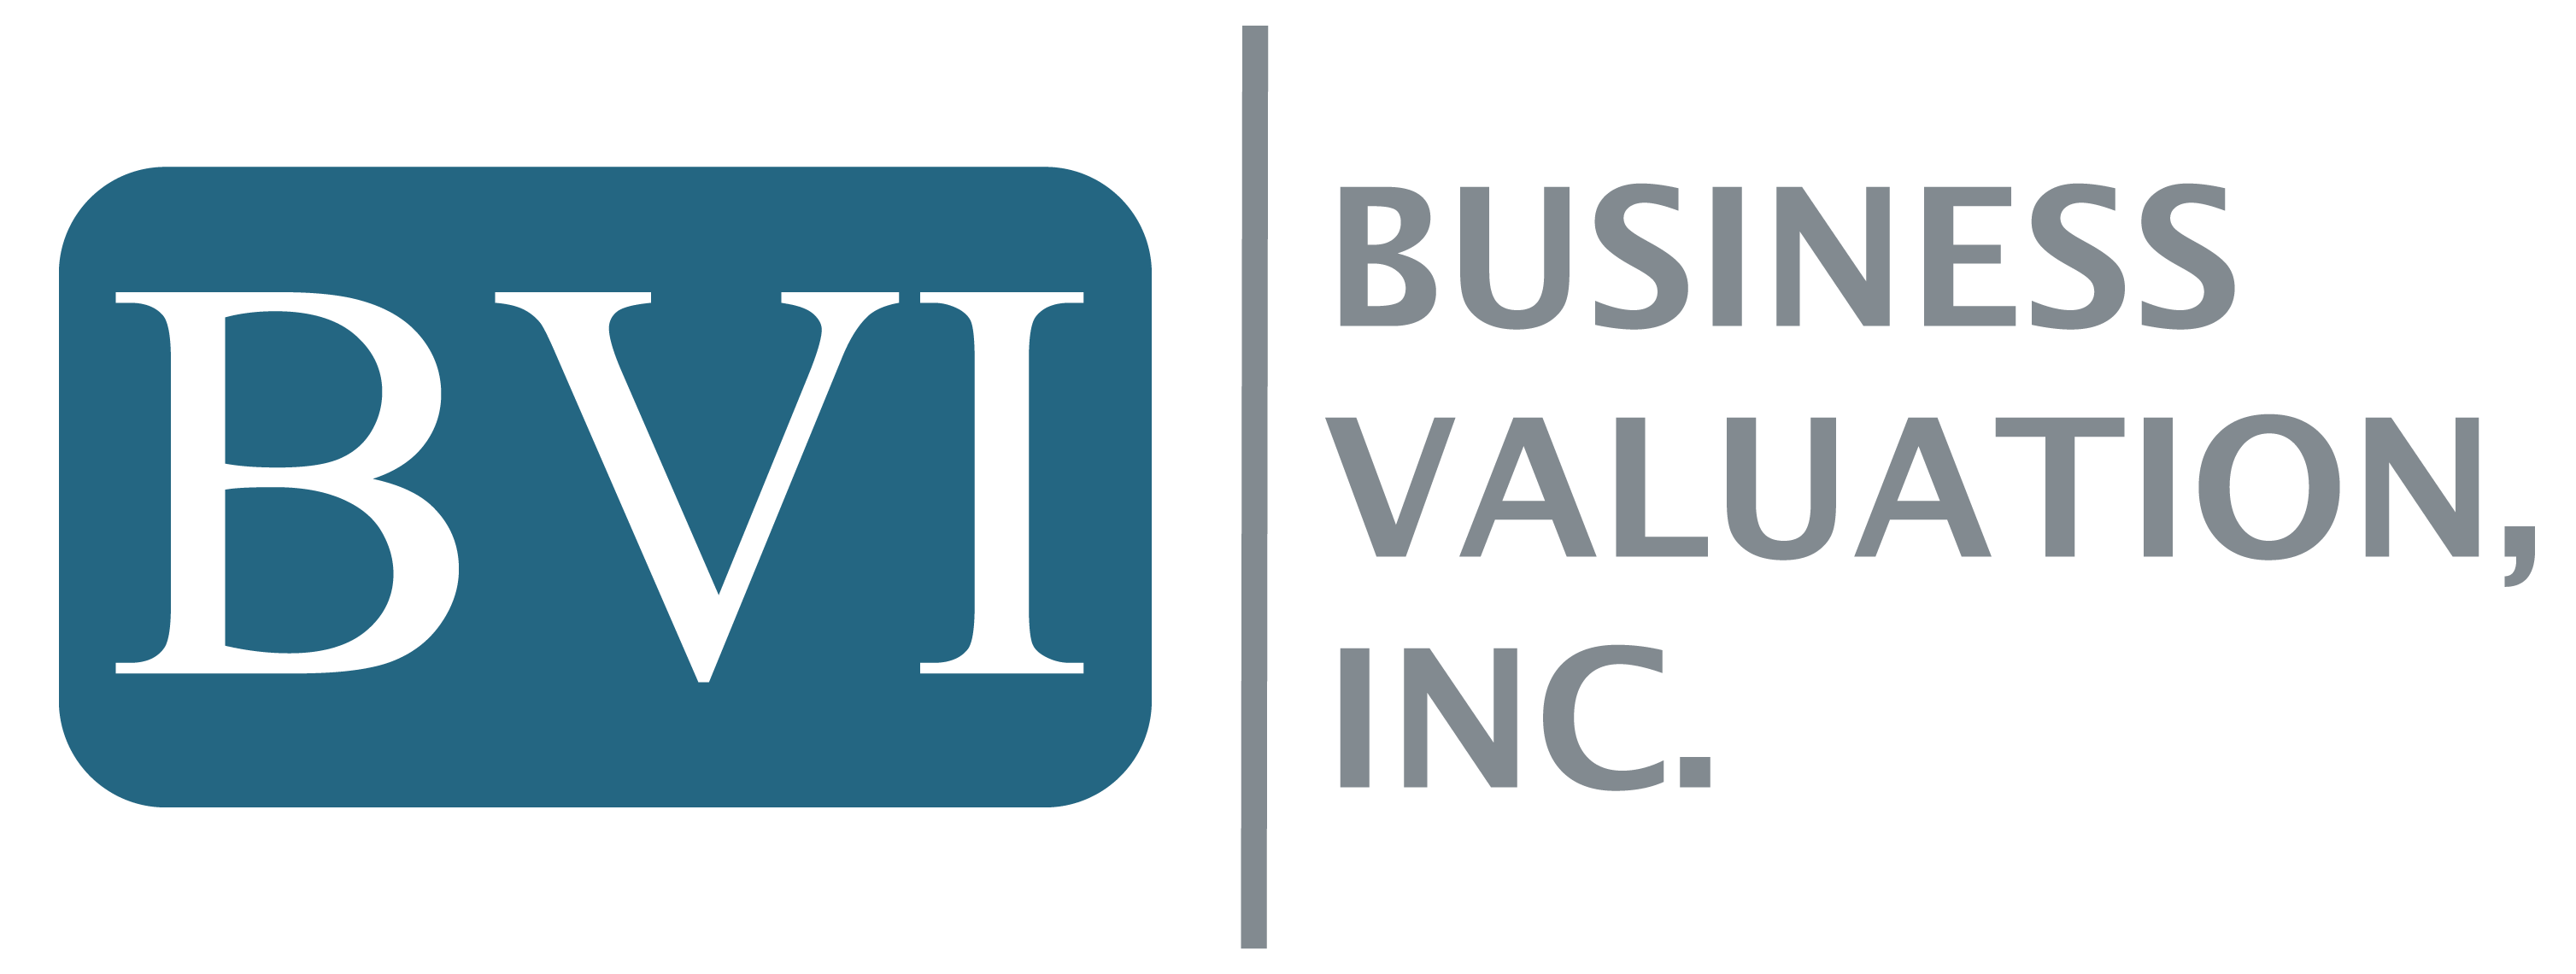 Business Valuation Inc